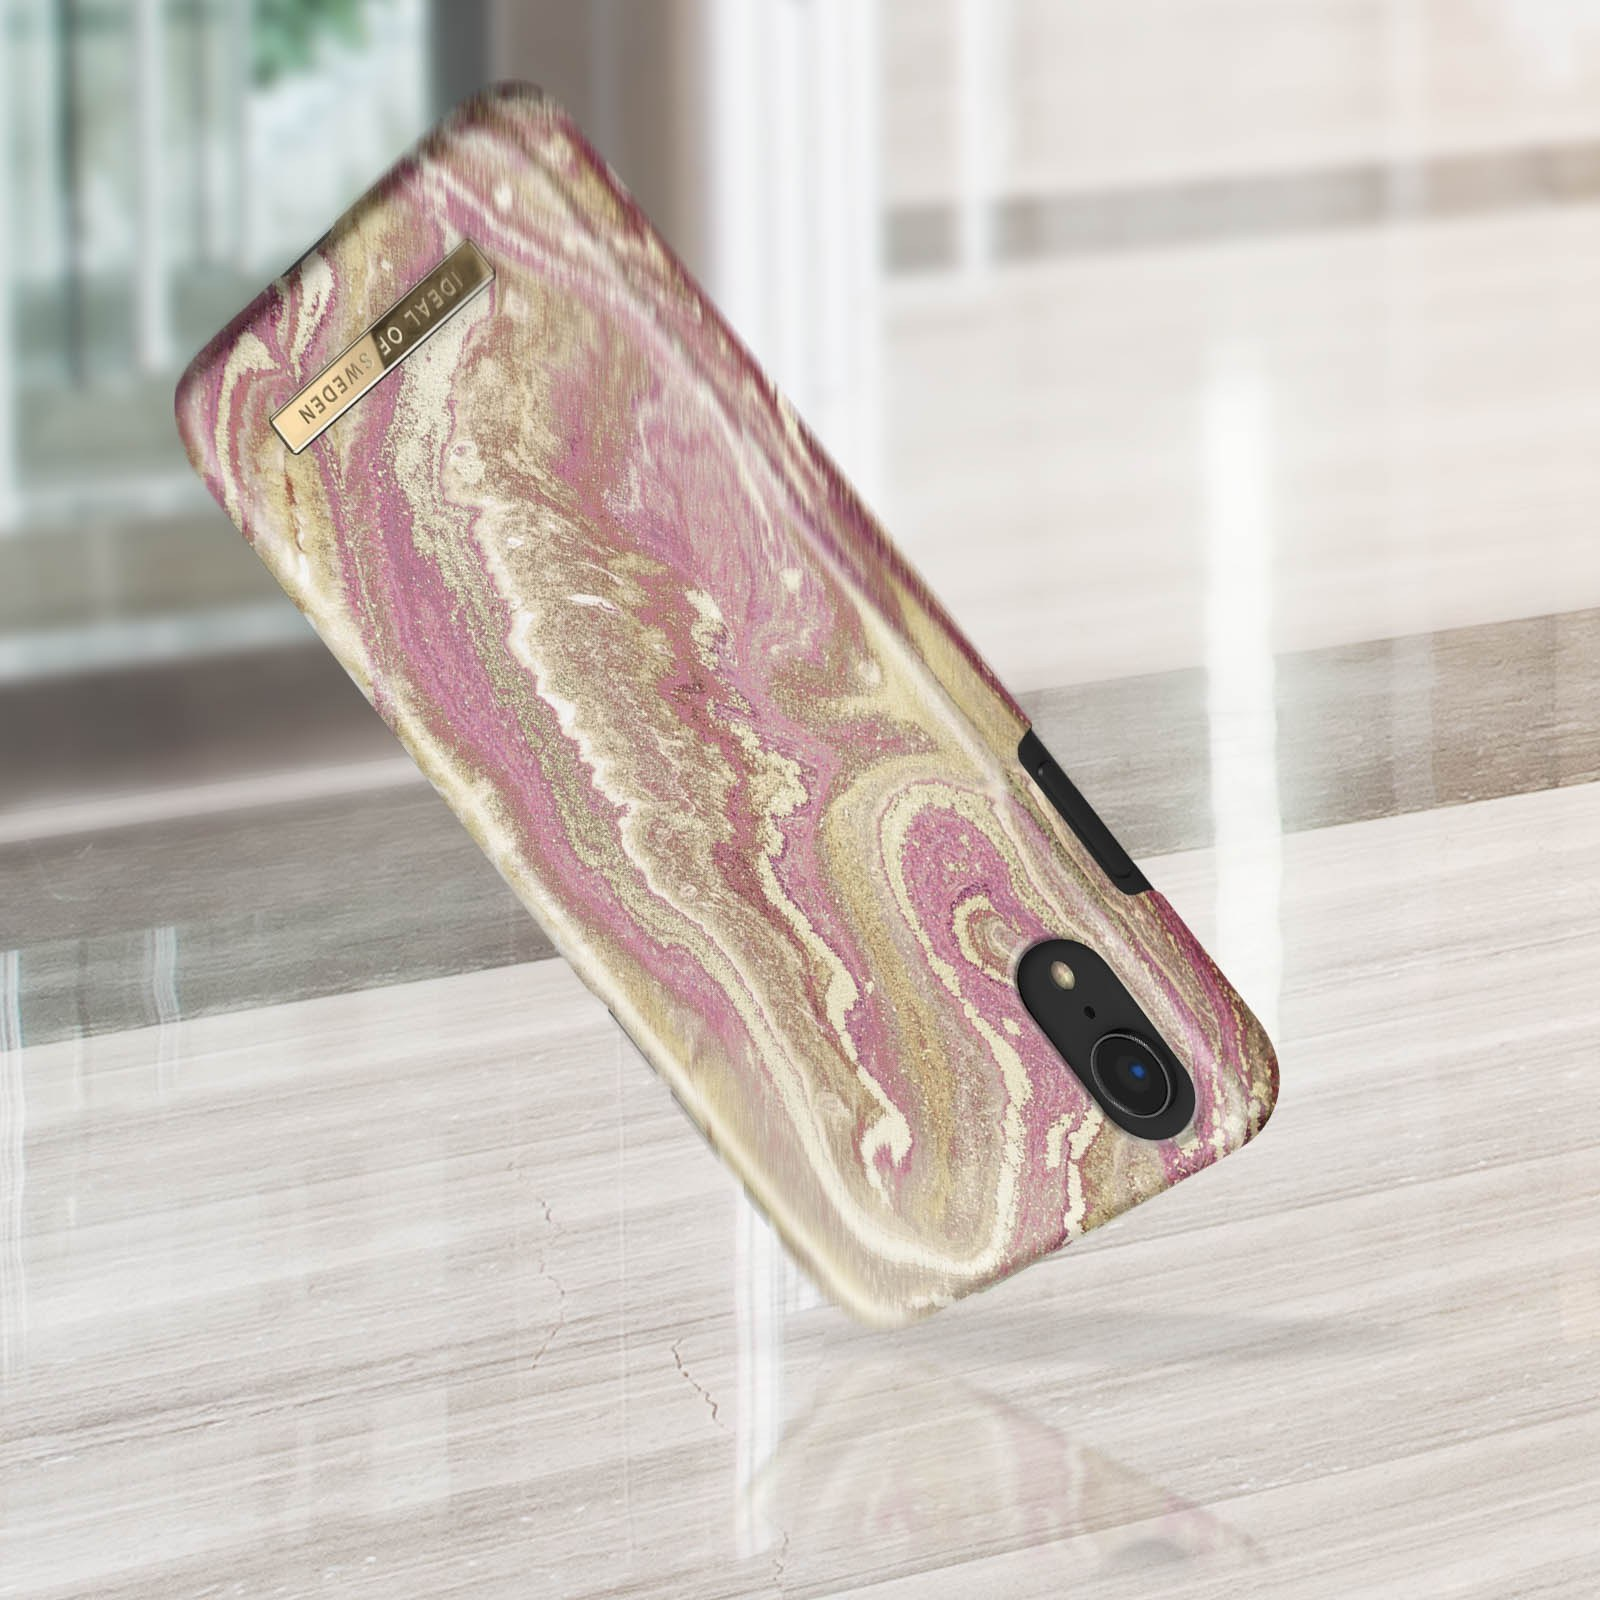 IDEAL OF Marble Hülle XR, Series, Backcover, Rosa SWEDEN Apple, Blush Golden iPhone